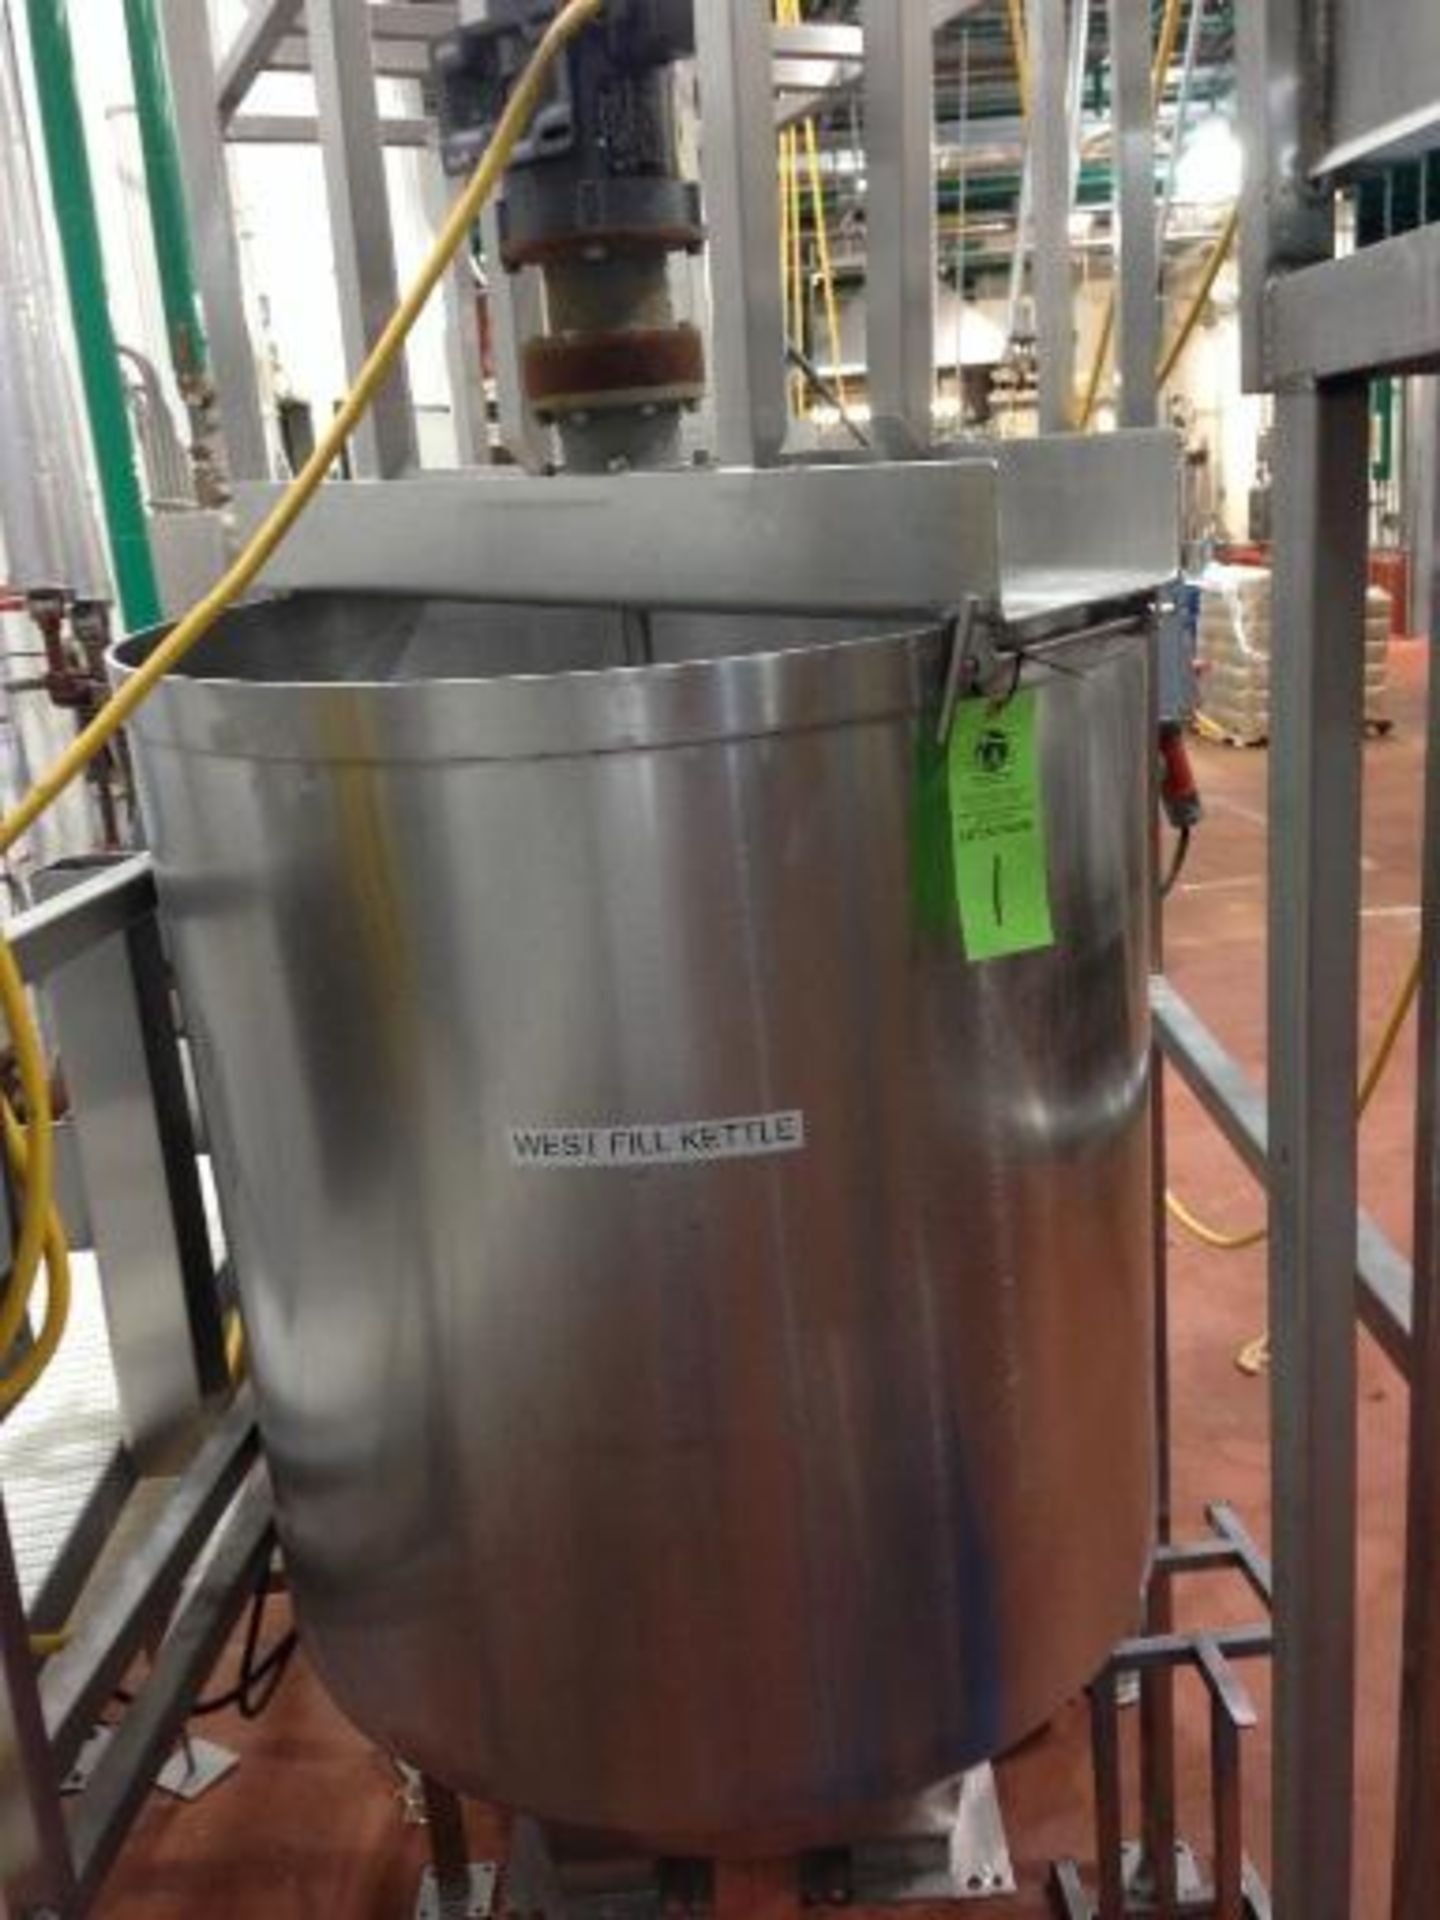 West Fill Kettle, Stainless Steel Kettle, 33 inch dia x 36 straight side, direct drive agitator,